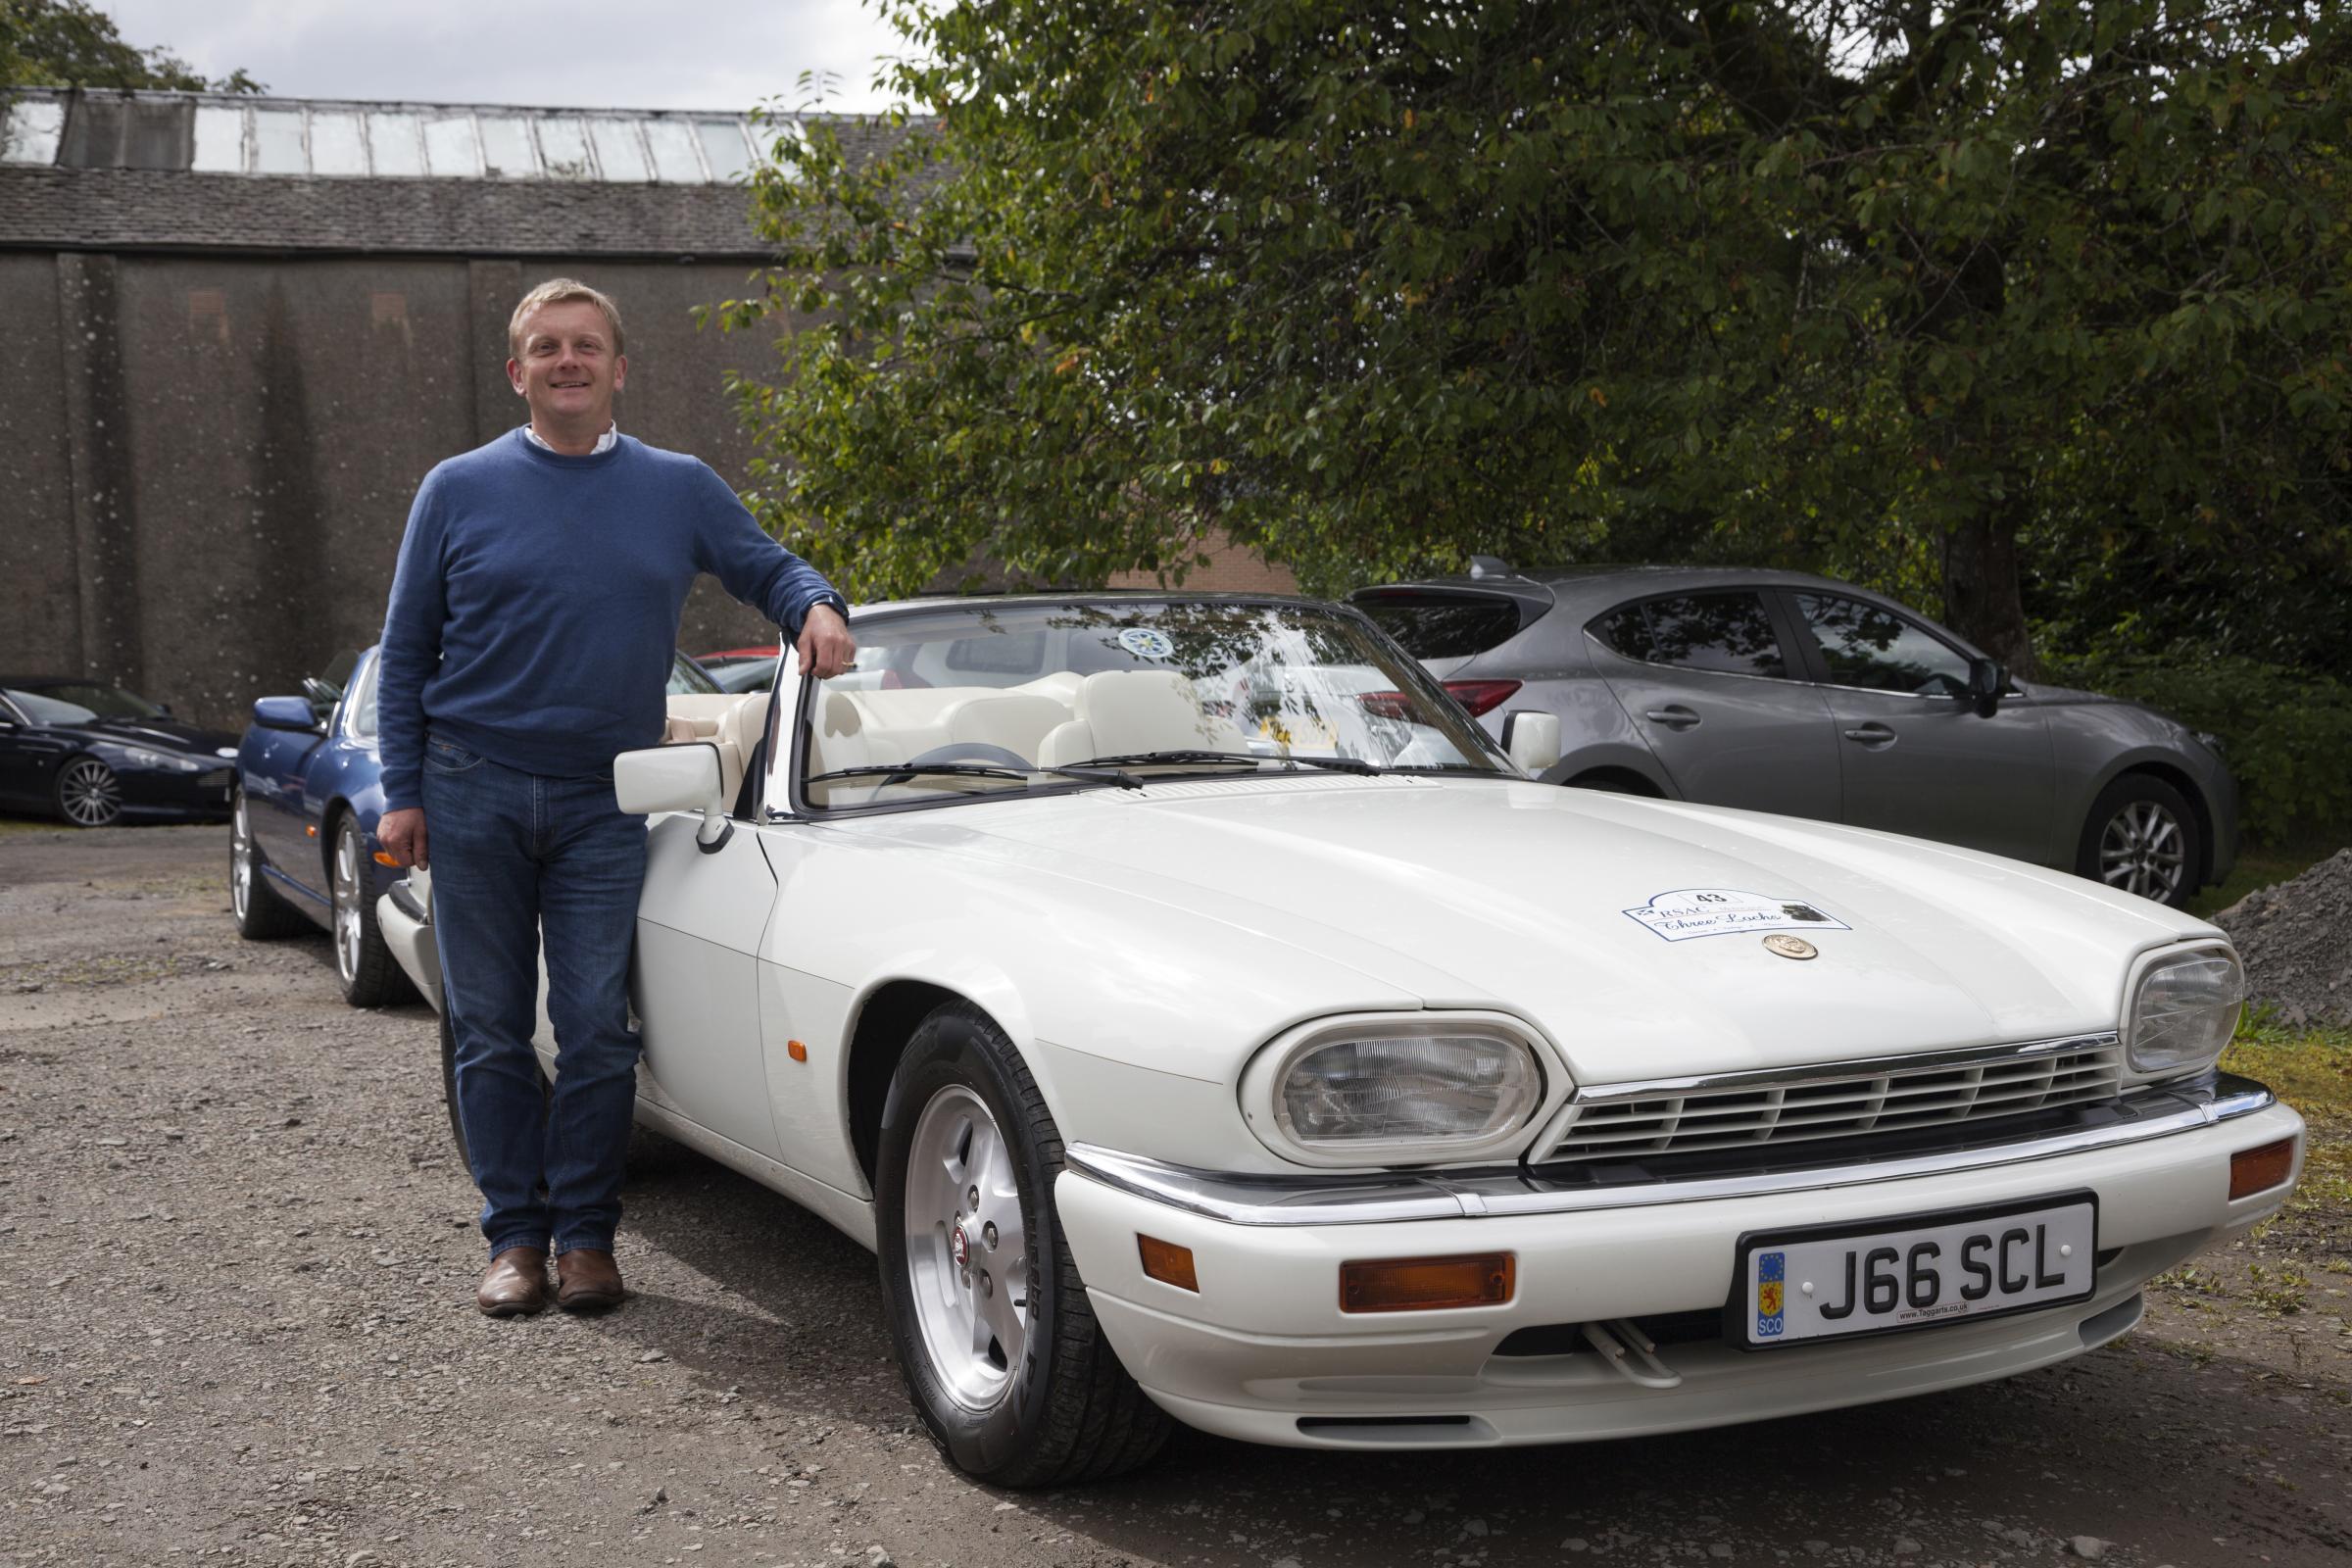 Helensburgh resident Rory Mackinlay’s 1994 Jaguar XJS Convertible has only 18,000 miles on the clock